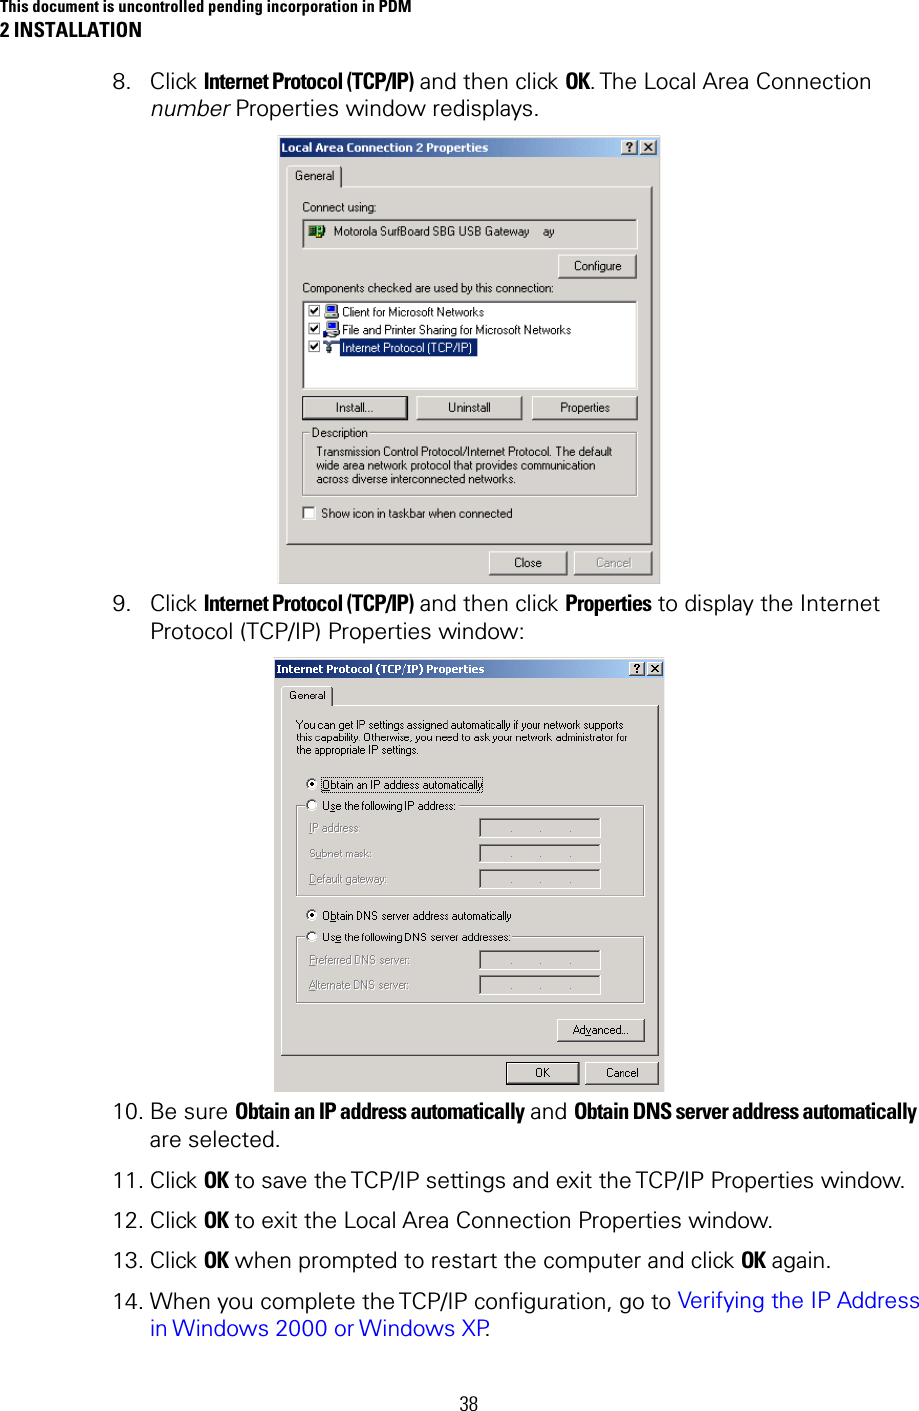 This document is uncontrolled pending incorporation in PDM 2 INSTALLATION 38 8. Click Internet Protocol (TCP/IP) and then click OK. The Local Area  Connection number Properties window redisplays.  9. Click Internet Protocol (TCP/IP) and then click Properties to display the Internet Protocol (TCP/IP) Properties window:  10. Be sure Obtain an IP address automatically and Obtain DNS server address automatically are selected. 11. Click OK to save the TCP/IP settings and exit the TCP/IP Properties window. 12. Click OK to exit the Local Area Connection Properties window. 13. Click OK when prompted to restart the computer and click OK again. 14. When you complete the TCP/IP configuration, go to Verifying the IP Address in Windows 2000 or Windows XP. 